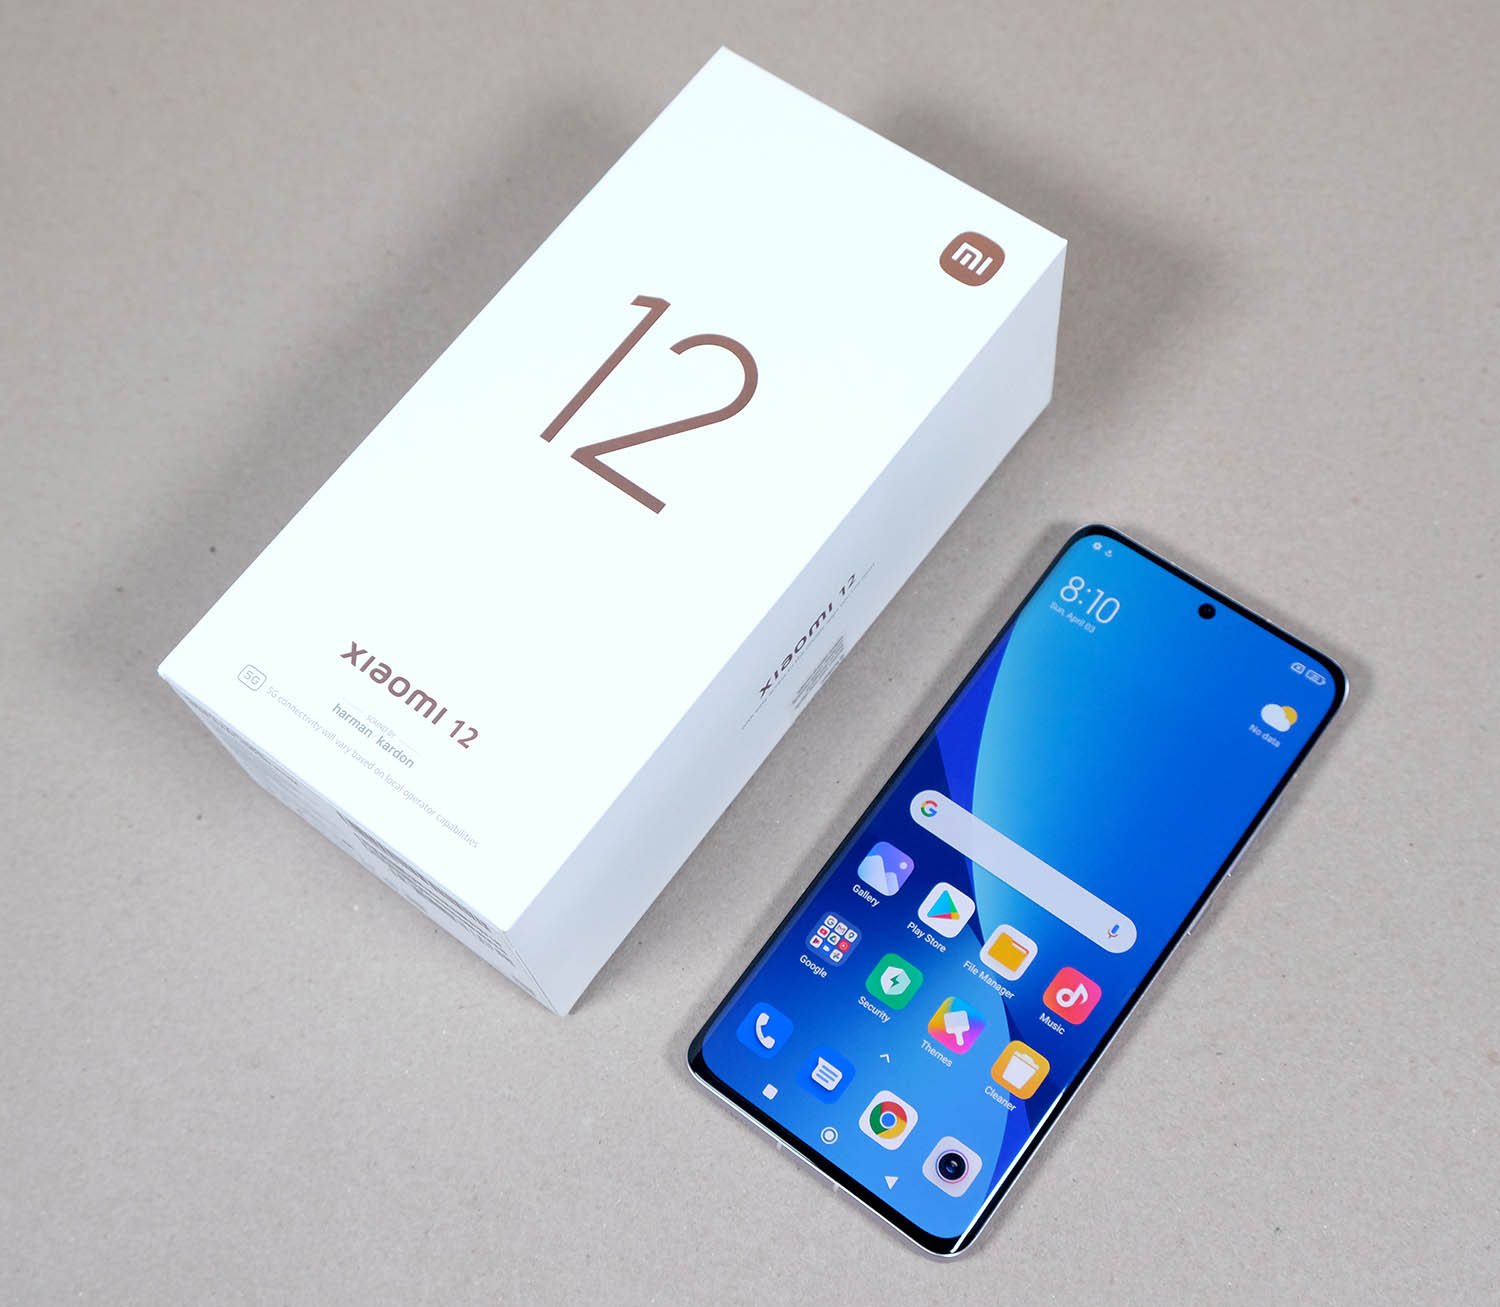 Xiaomi 12 – Unboxing and First Impressions